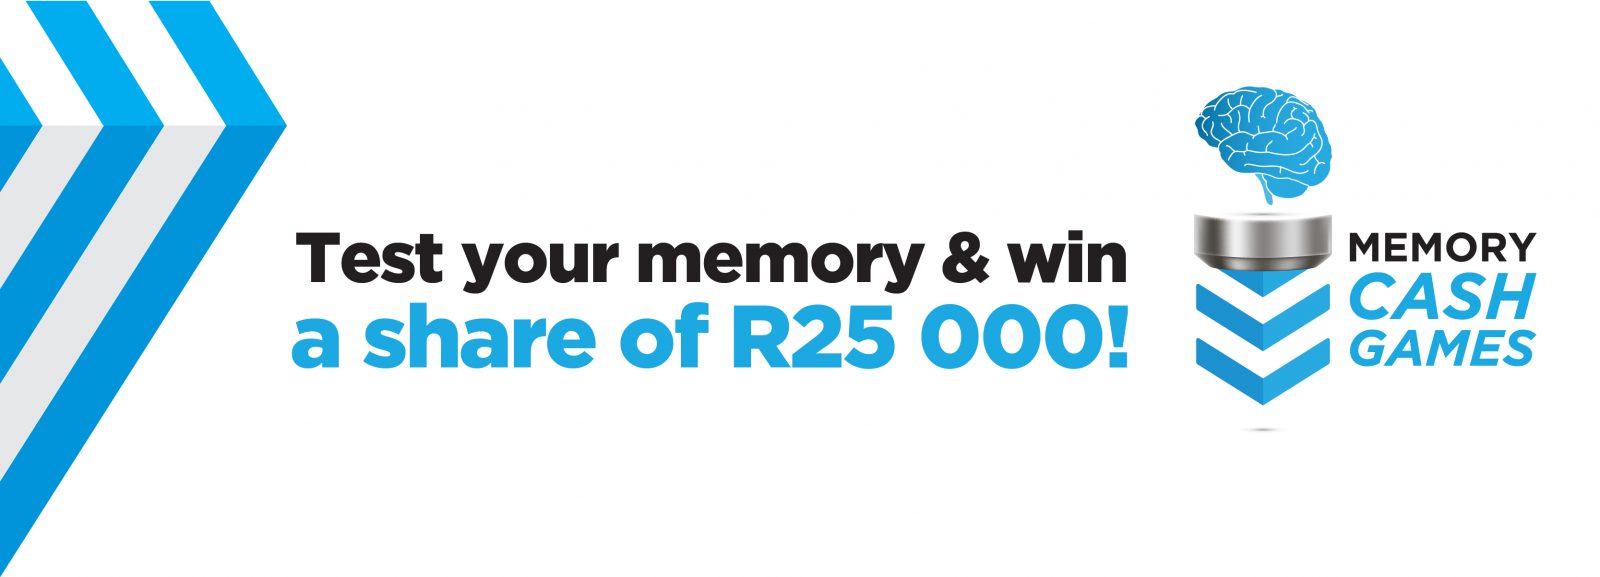 Test your memory & win a share of R25 000!